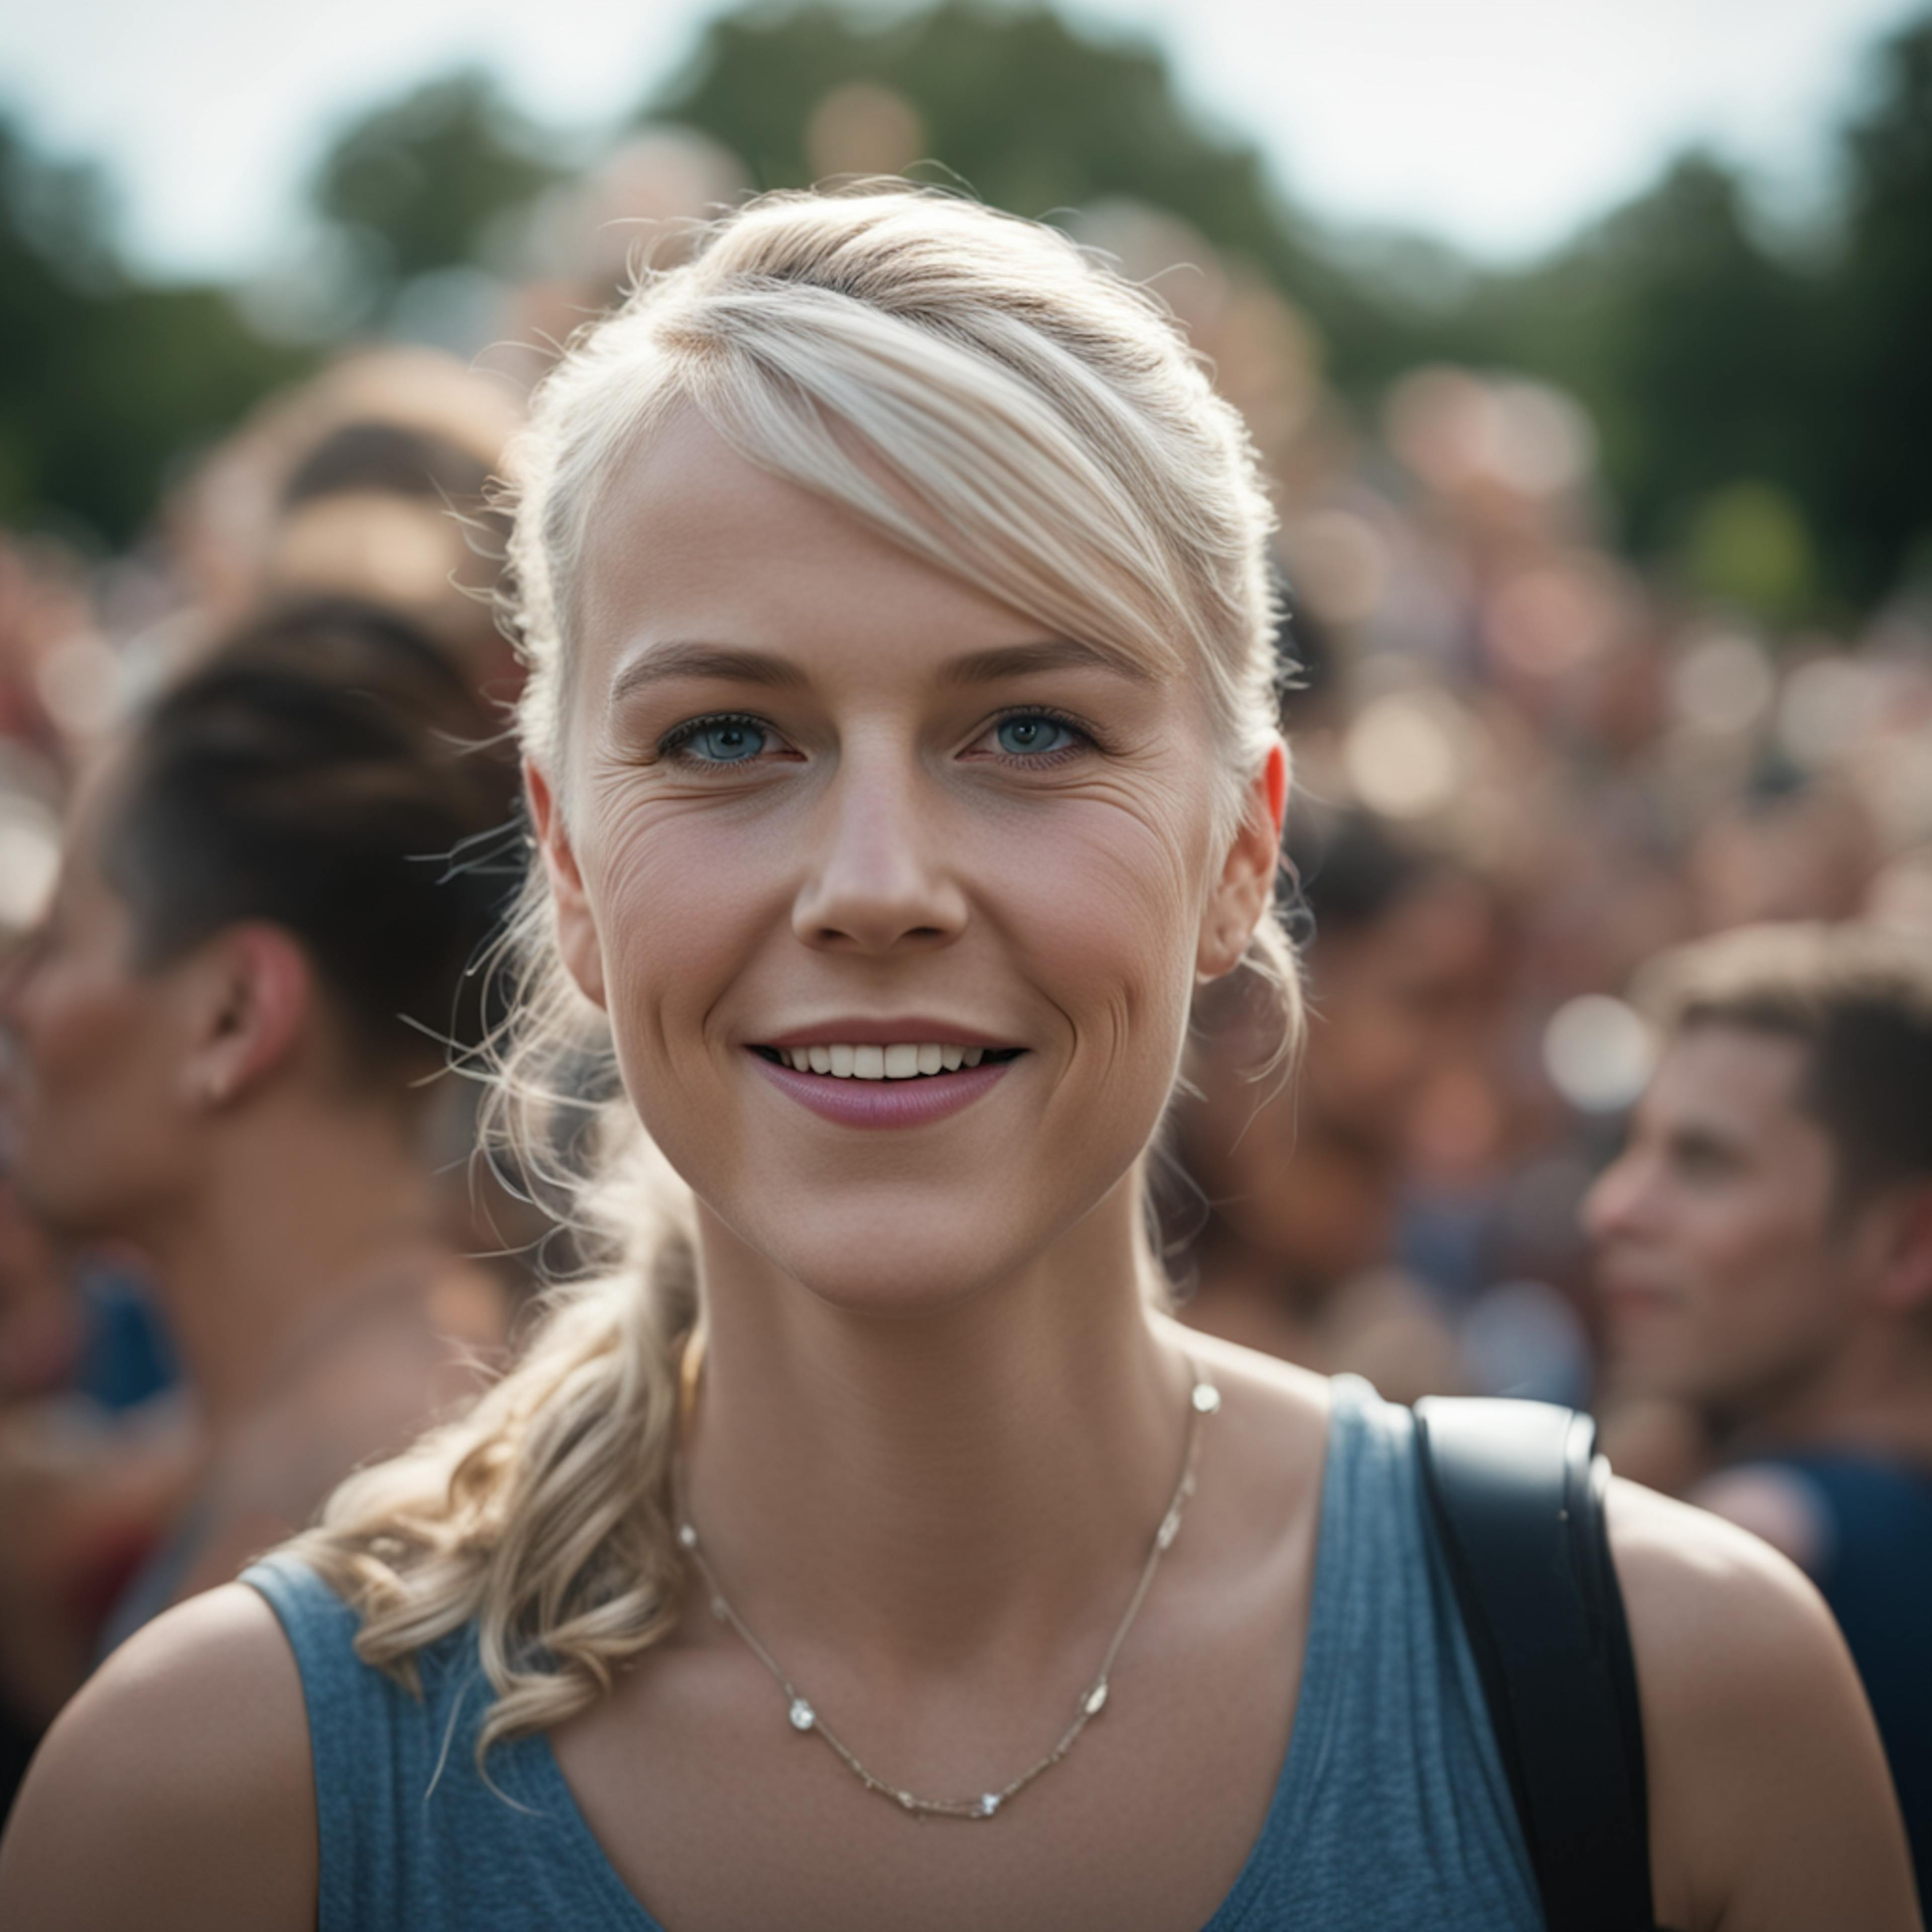 A smiling young woman with blonde hair and blue eyes stands in a lively crowd. She is wearing a blue top and a delicate necklace. The vibrant atmosphere around her suggests a bustling event, possibly organized by the High Point Market Authority.